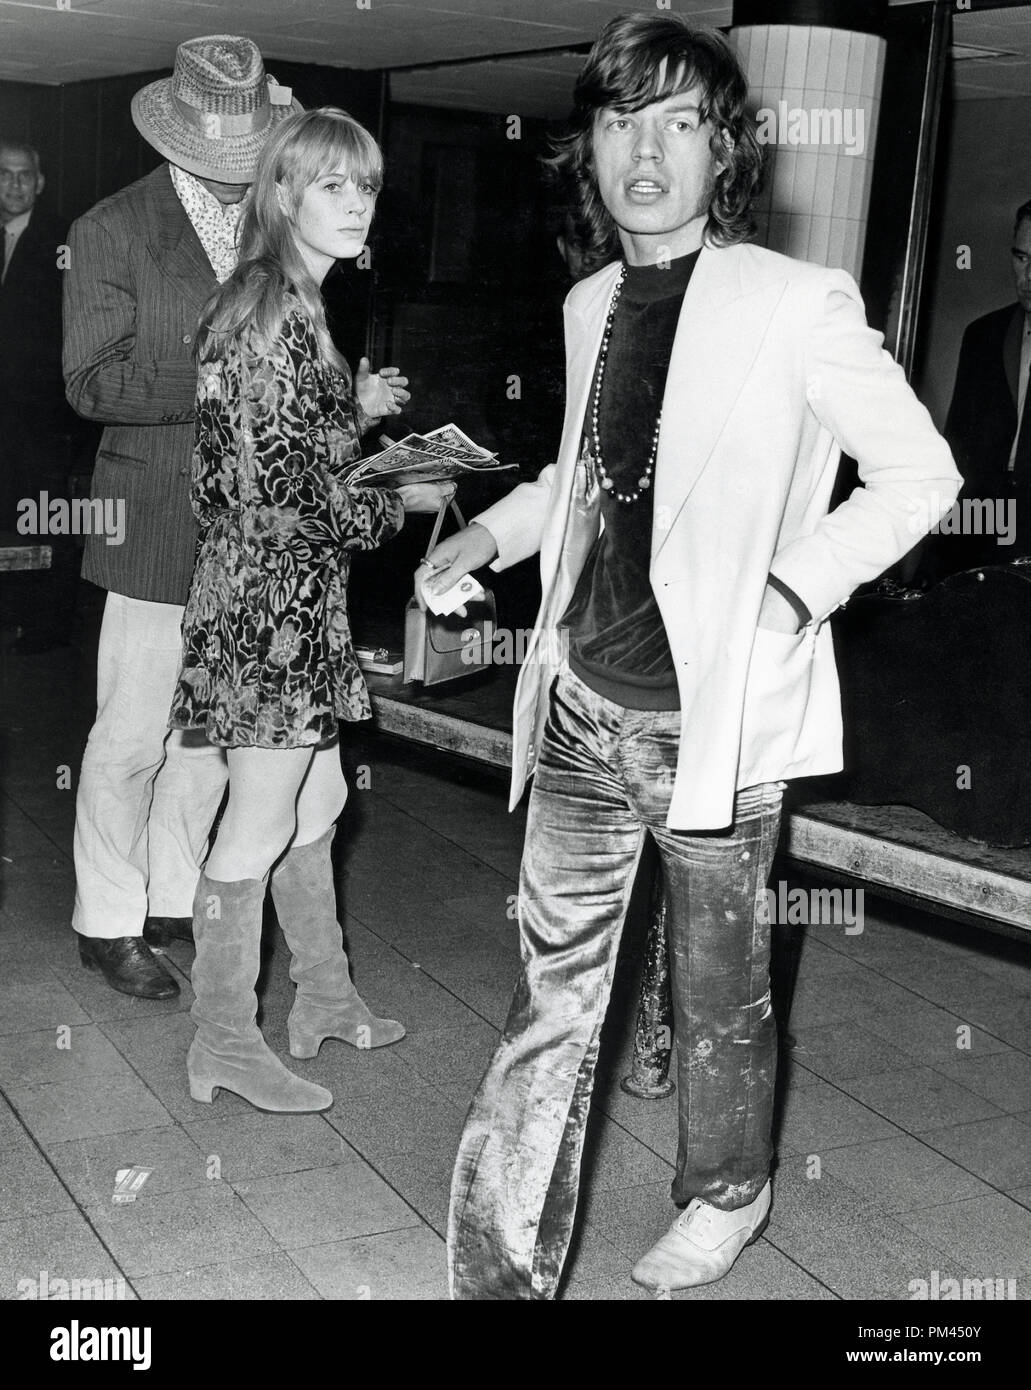 Mick Jagger of the Rolling Stones, and girlfriend Marianne Faithful ...